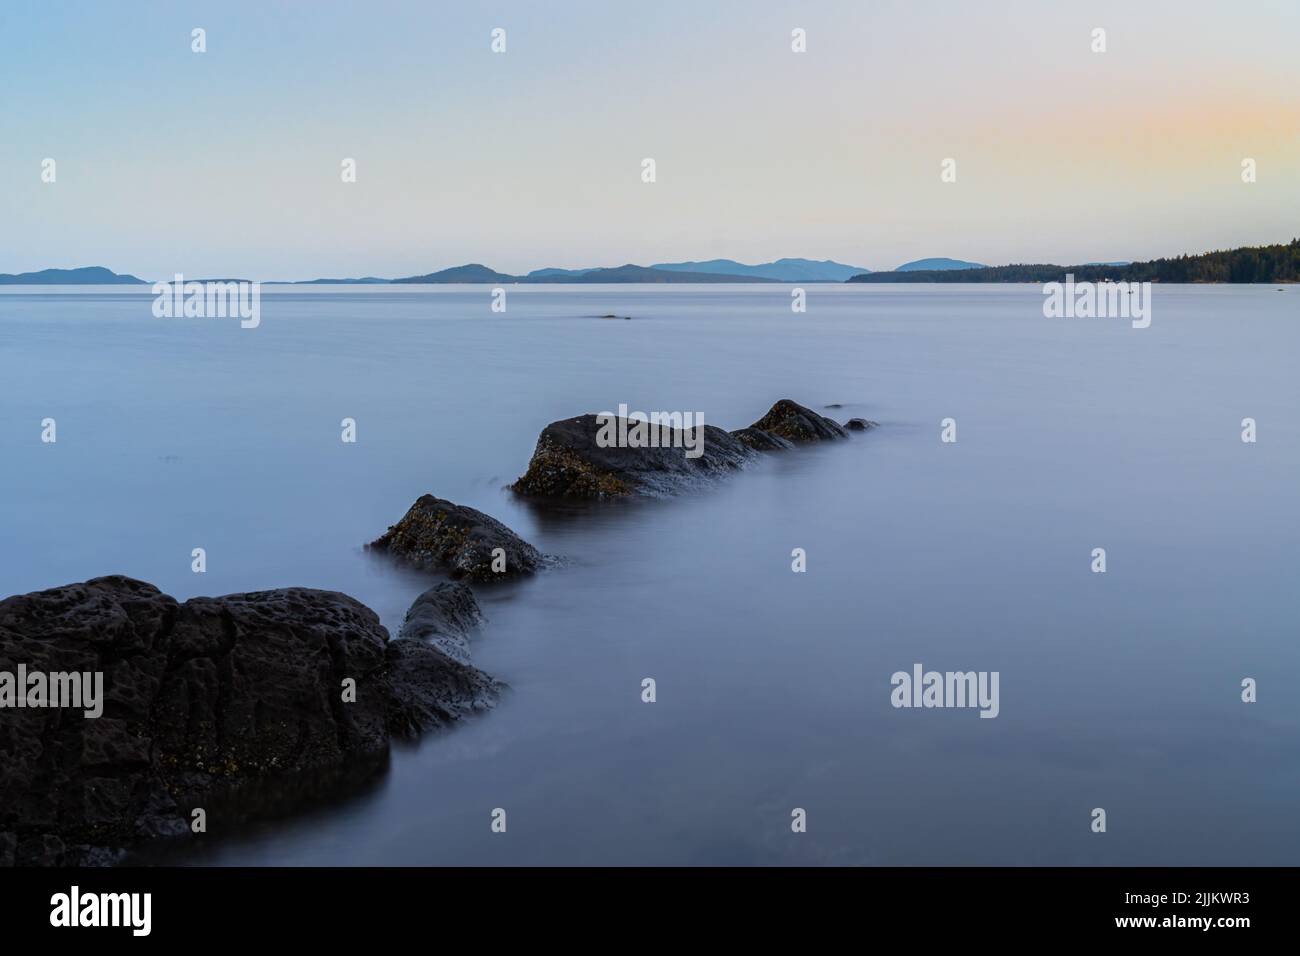 A beautiful view of rocks surrounded by fog in Nanaimo, BC, Canada Stock Photo